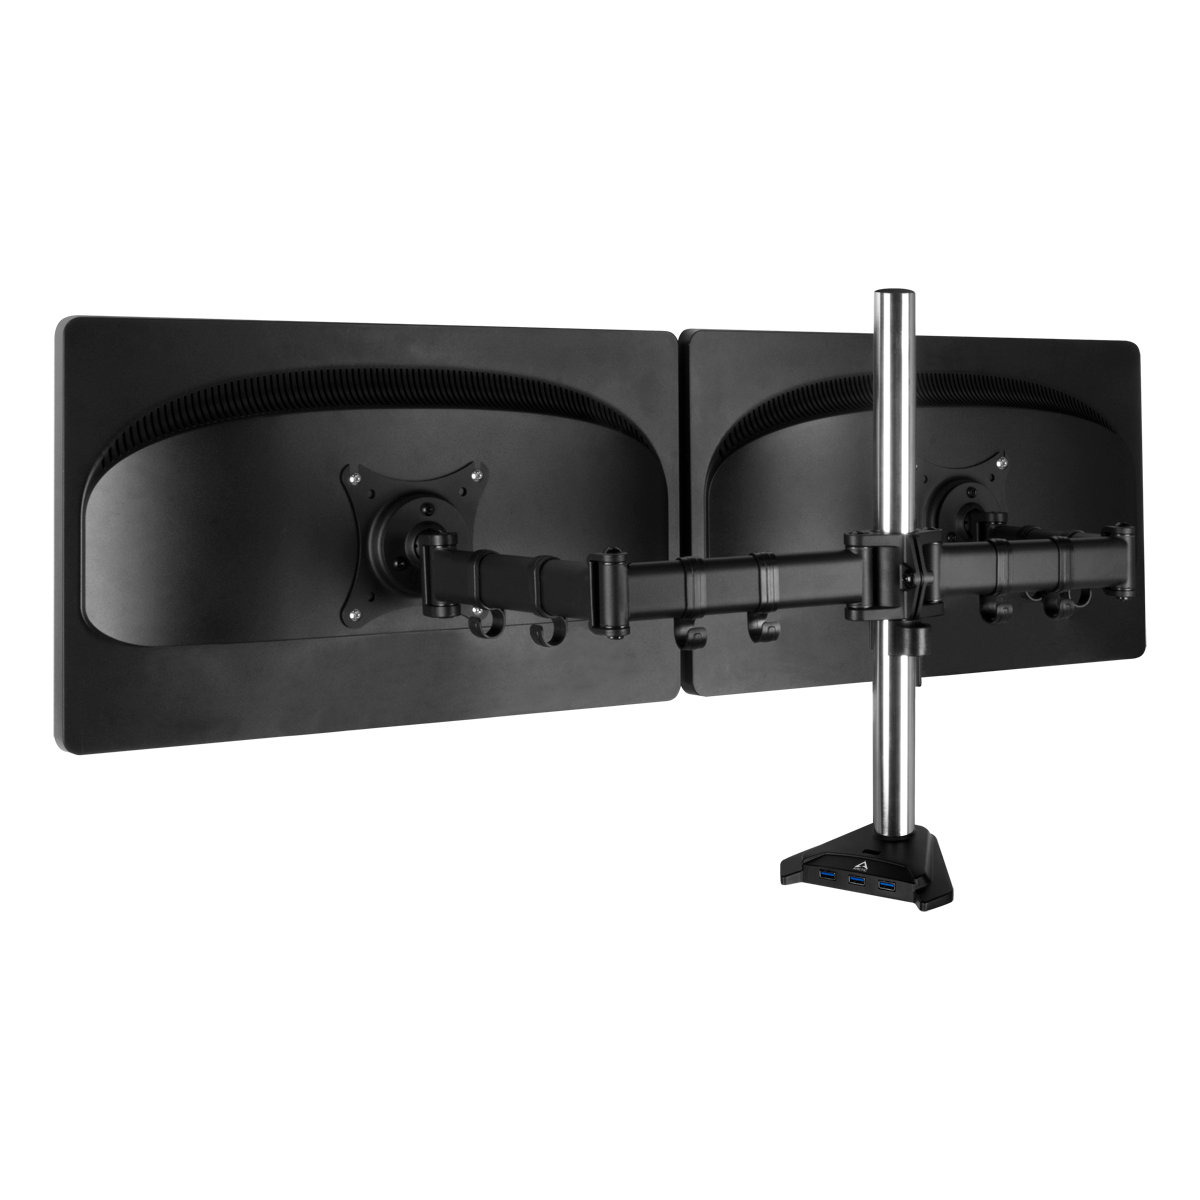 Monitor with Desk Mount Dual Monitor Arm ARCTIC Z2 Pro (Gen 3)